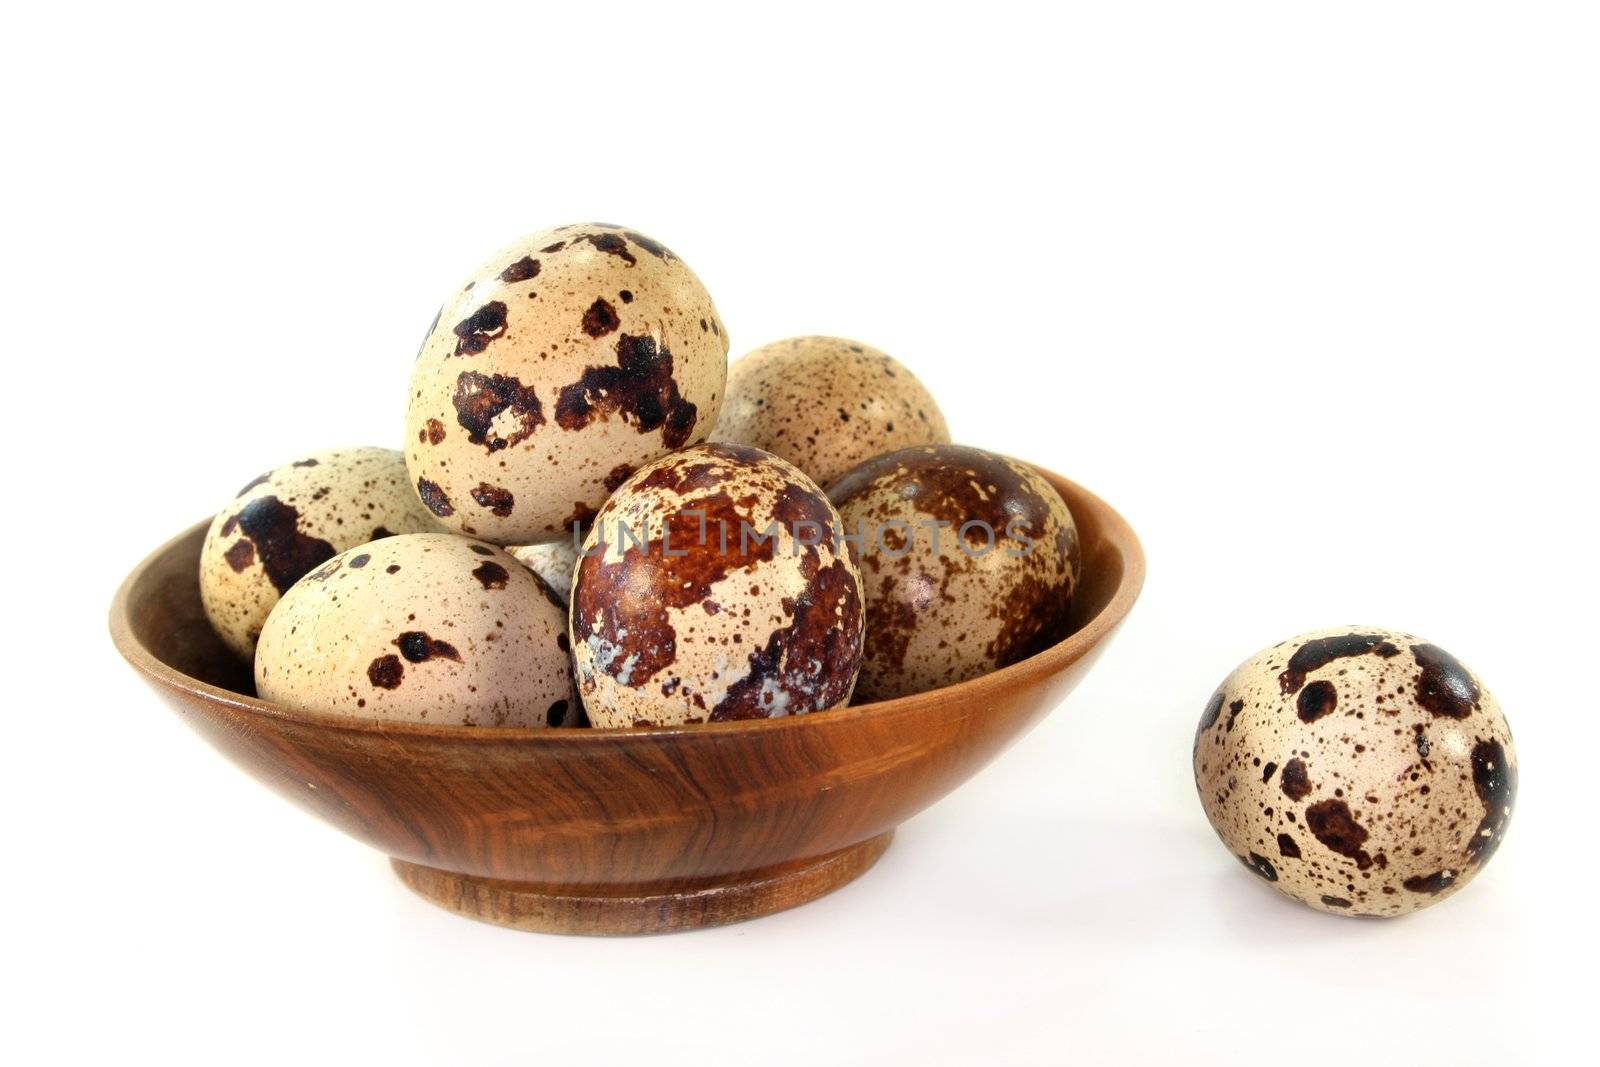 a couple of quail eggs on a white background